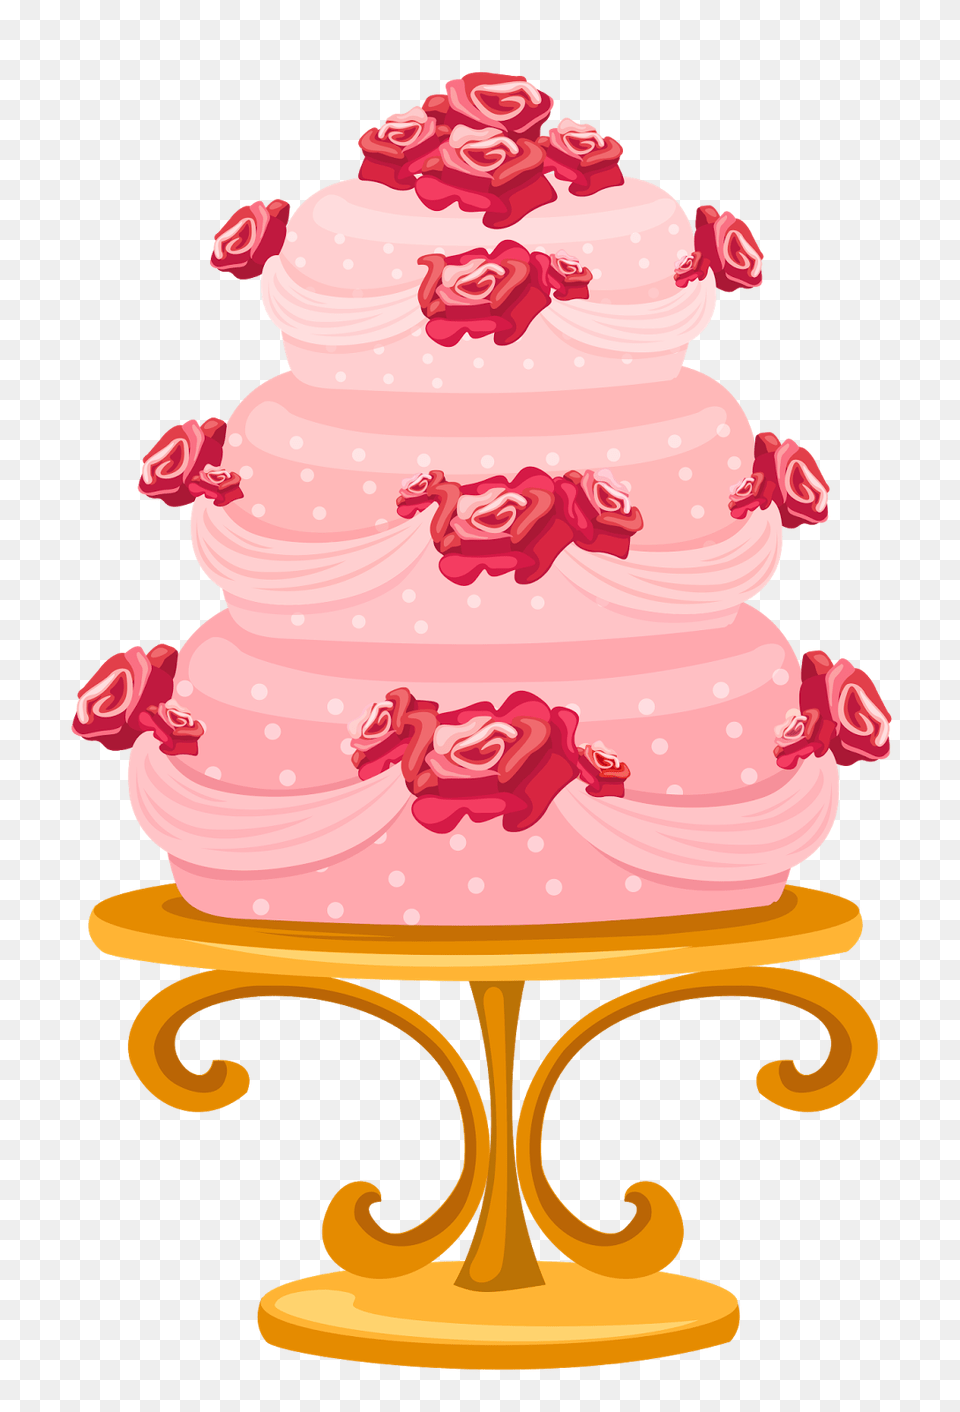 Greetings And Wishes Clip, Birthday Cake, Cake, Cream, Dessert Free Transparent Png